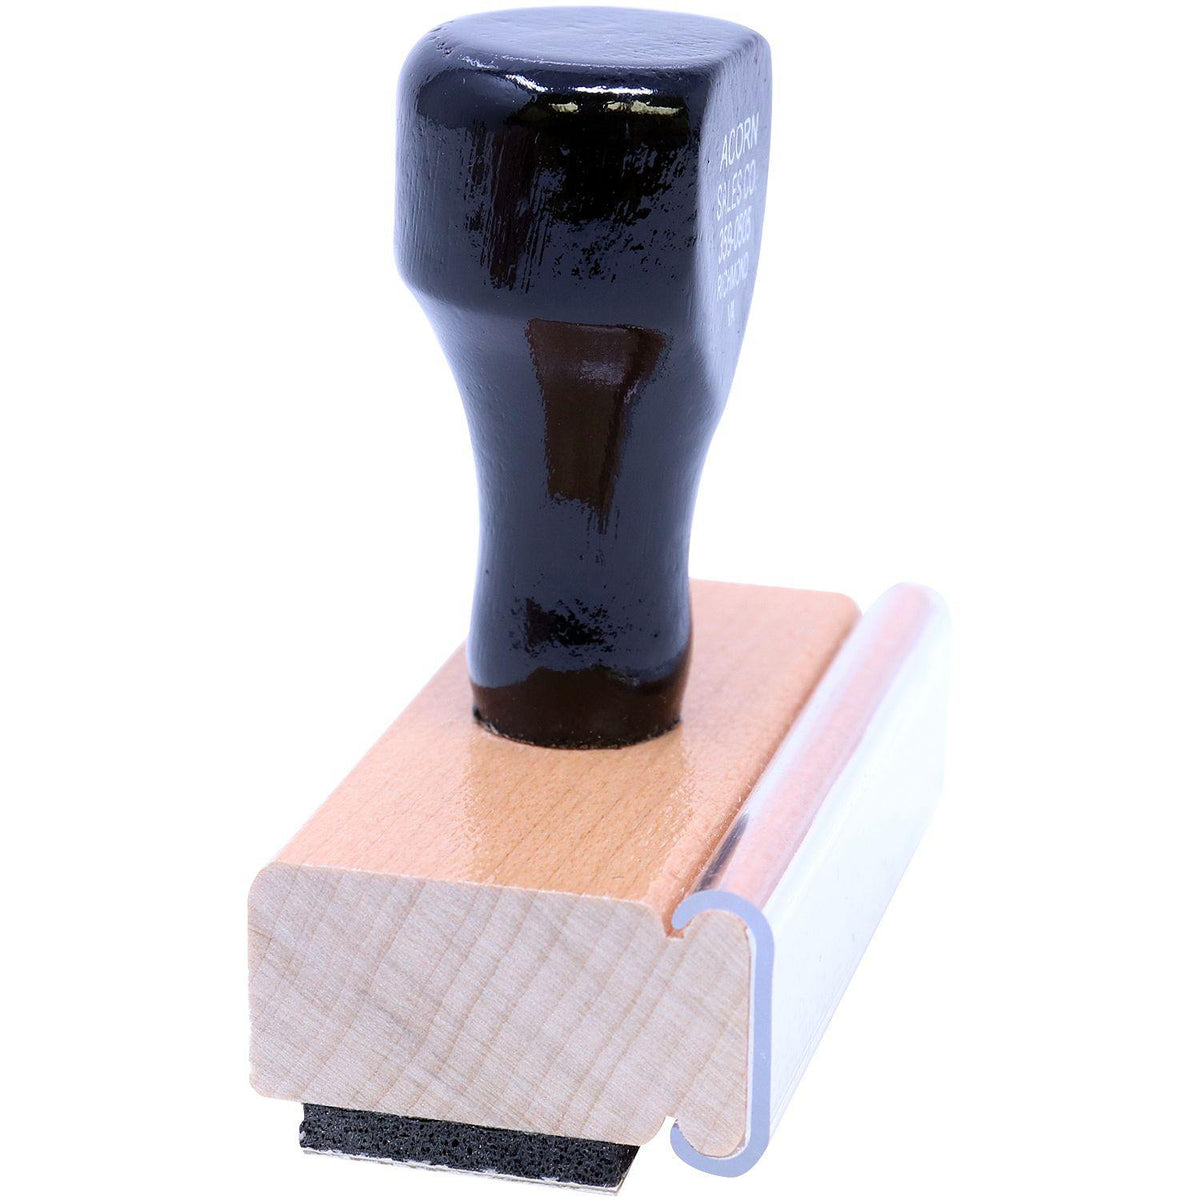 Side View of Large Rush Rubber Stamp at an Angle